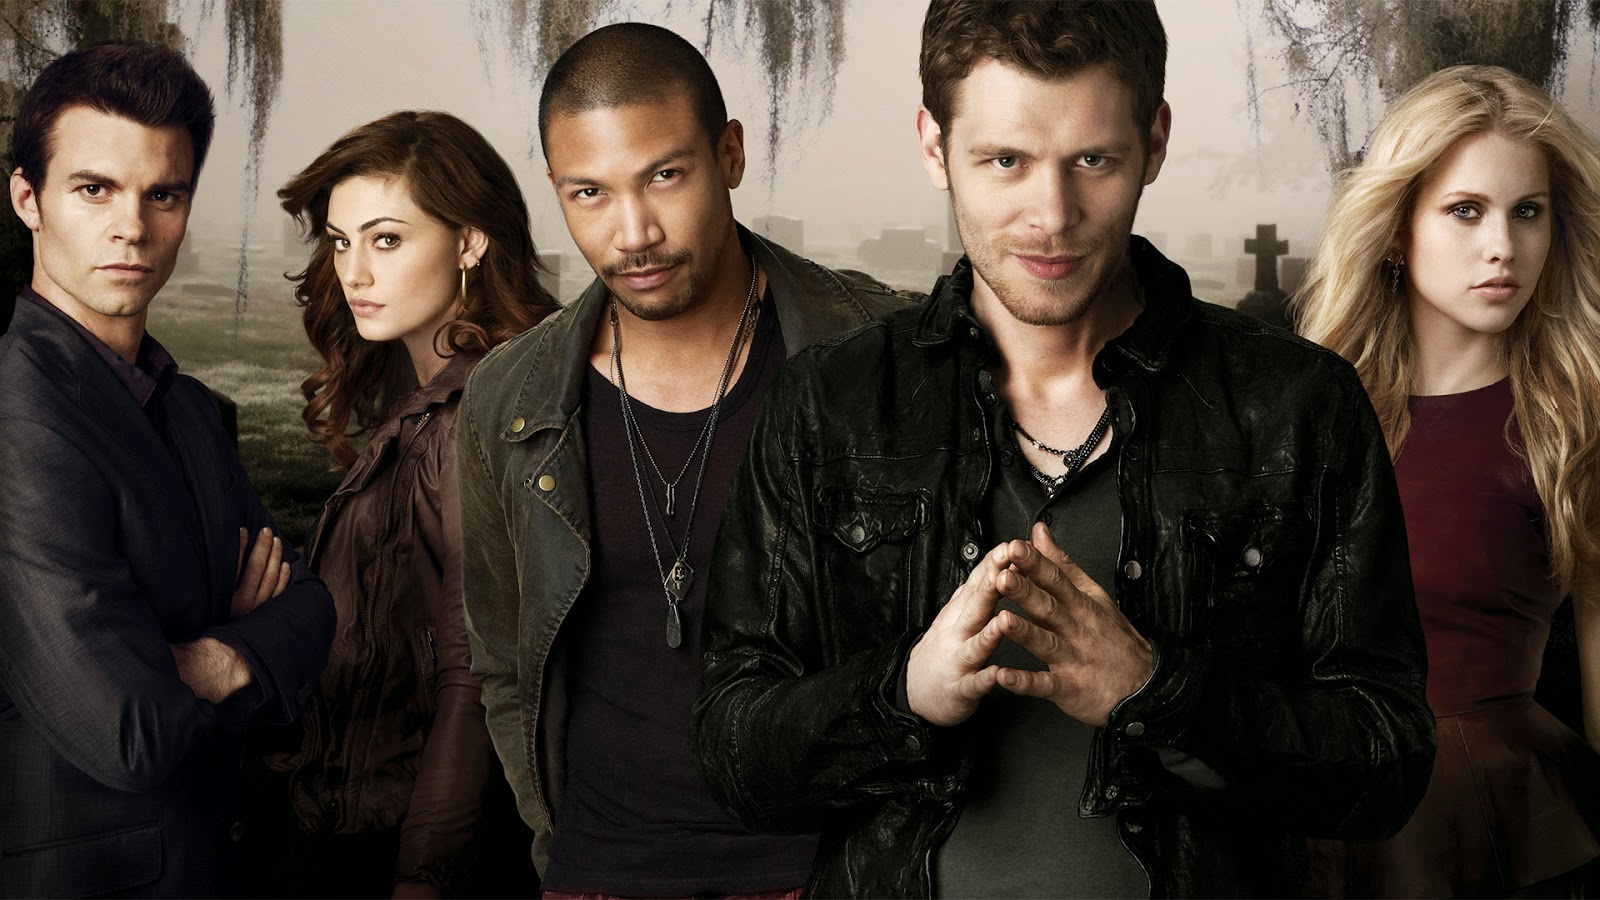 How THE ORIGINALS' Mikaelson Family Upholds White Supremacy - Nerdist